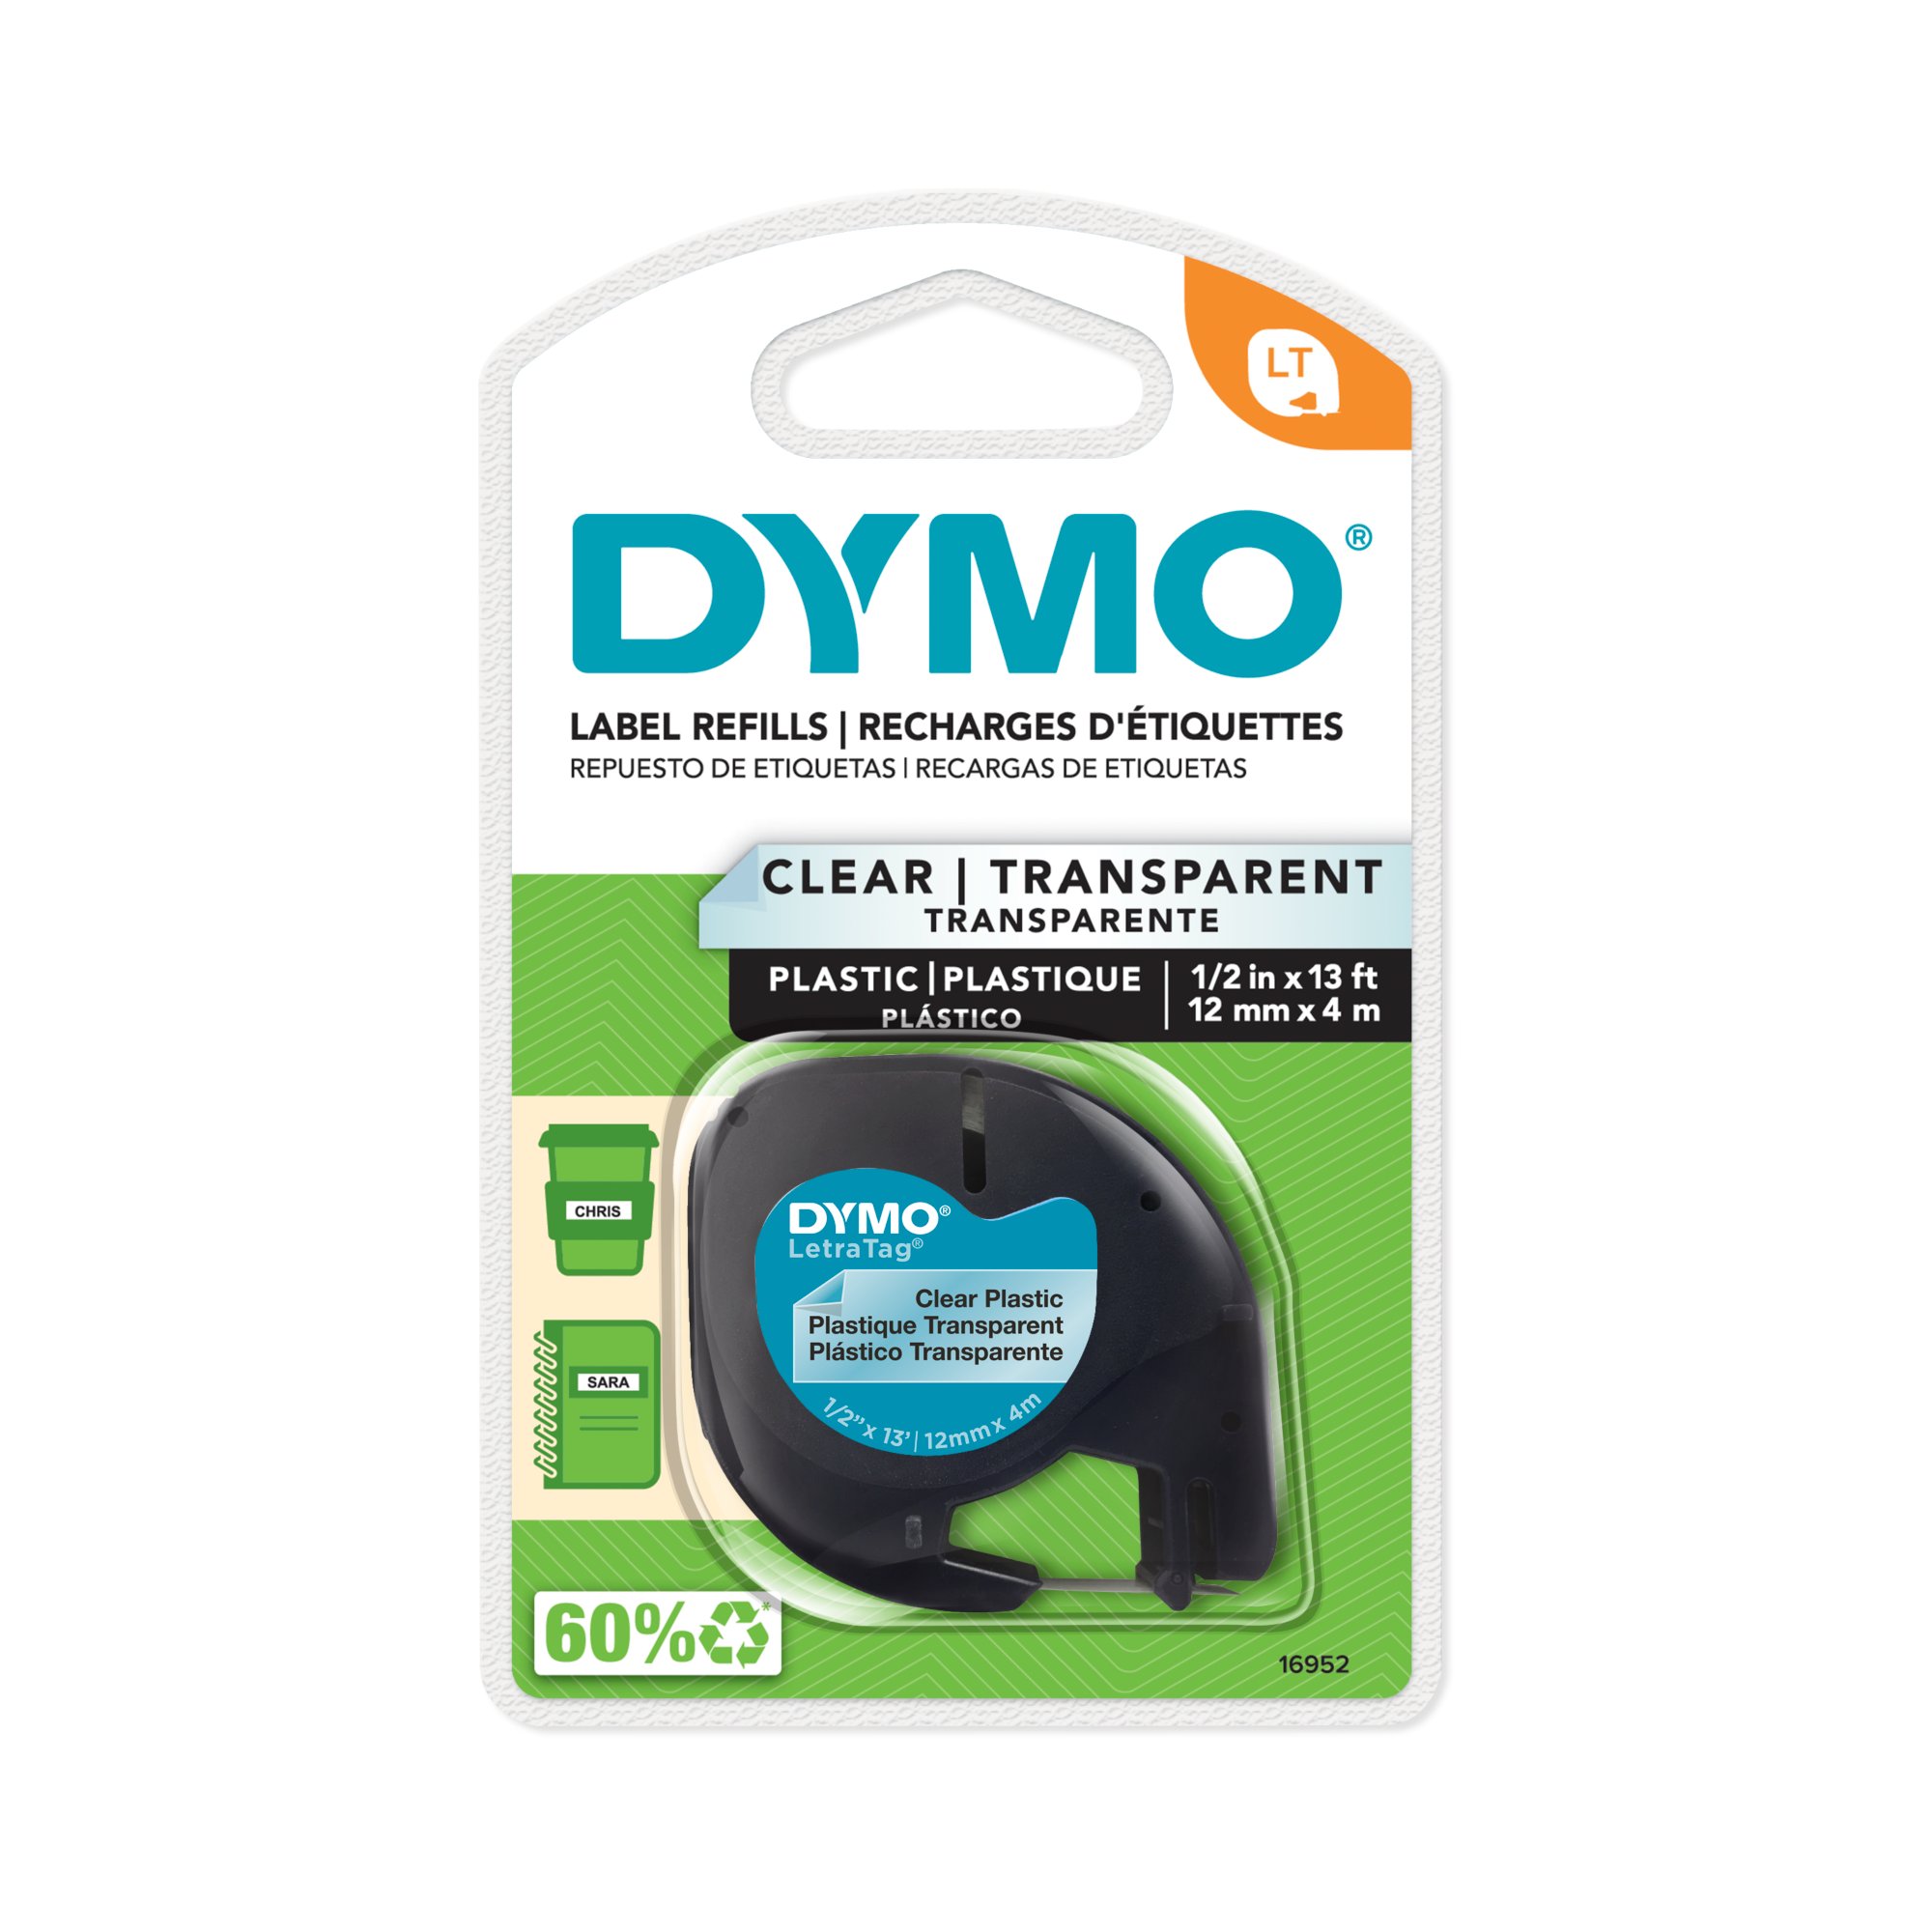 DYMO LetraTag LT-100T Plus Compact 1733013 Portable Label Maker with QWERTY Keyboard 